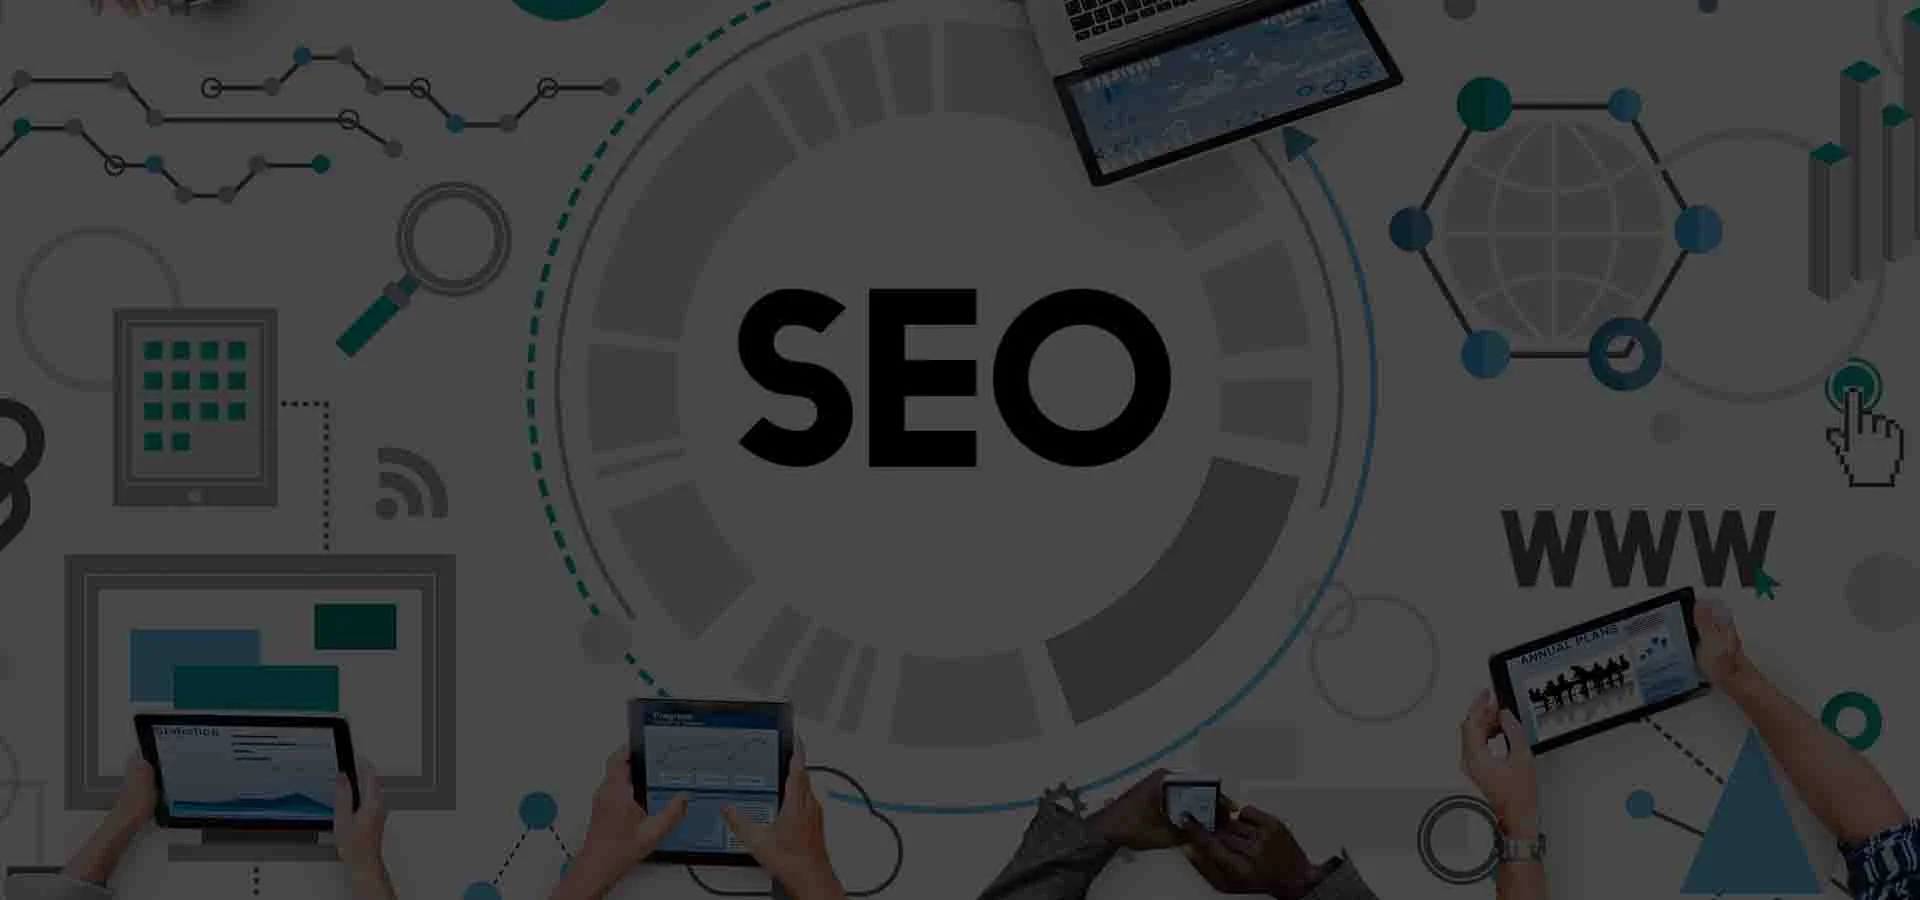 what-are-the-top-10-seo-tactics-beneficial-for-businesses-in-2020-related-blog-23